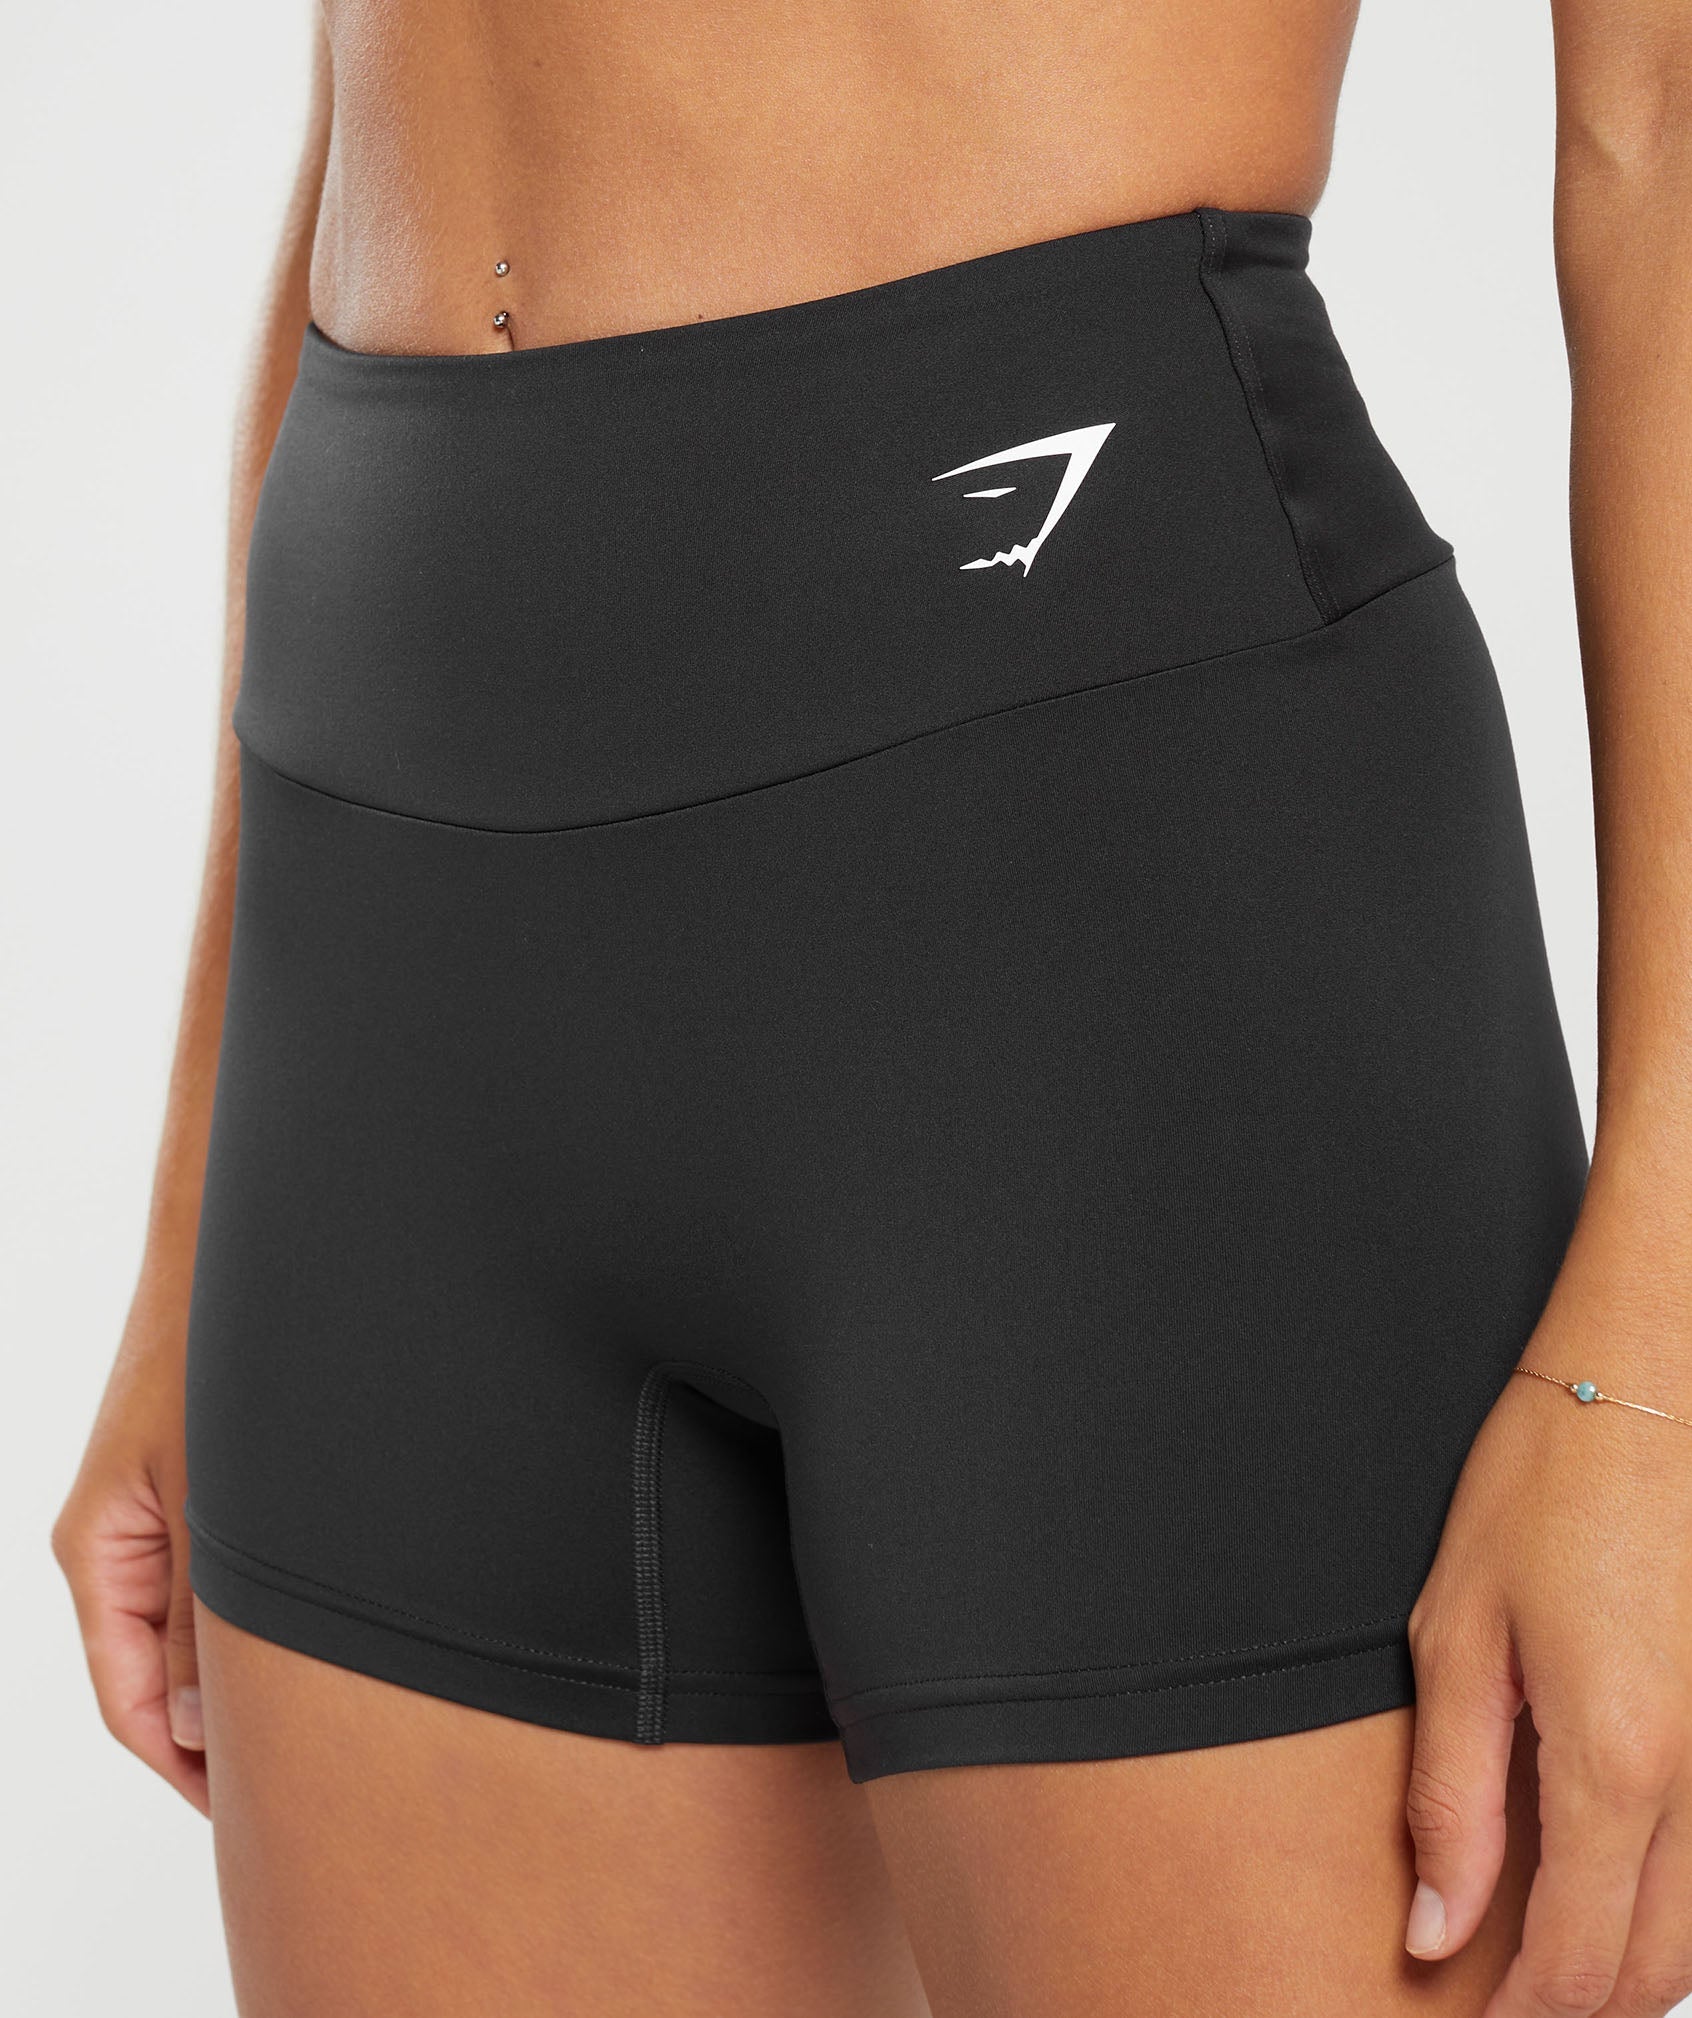 Training Shorts in Black - view 6